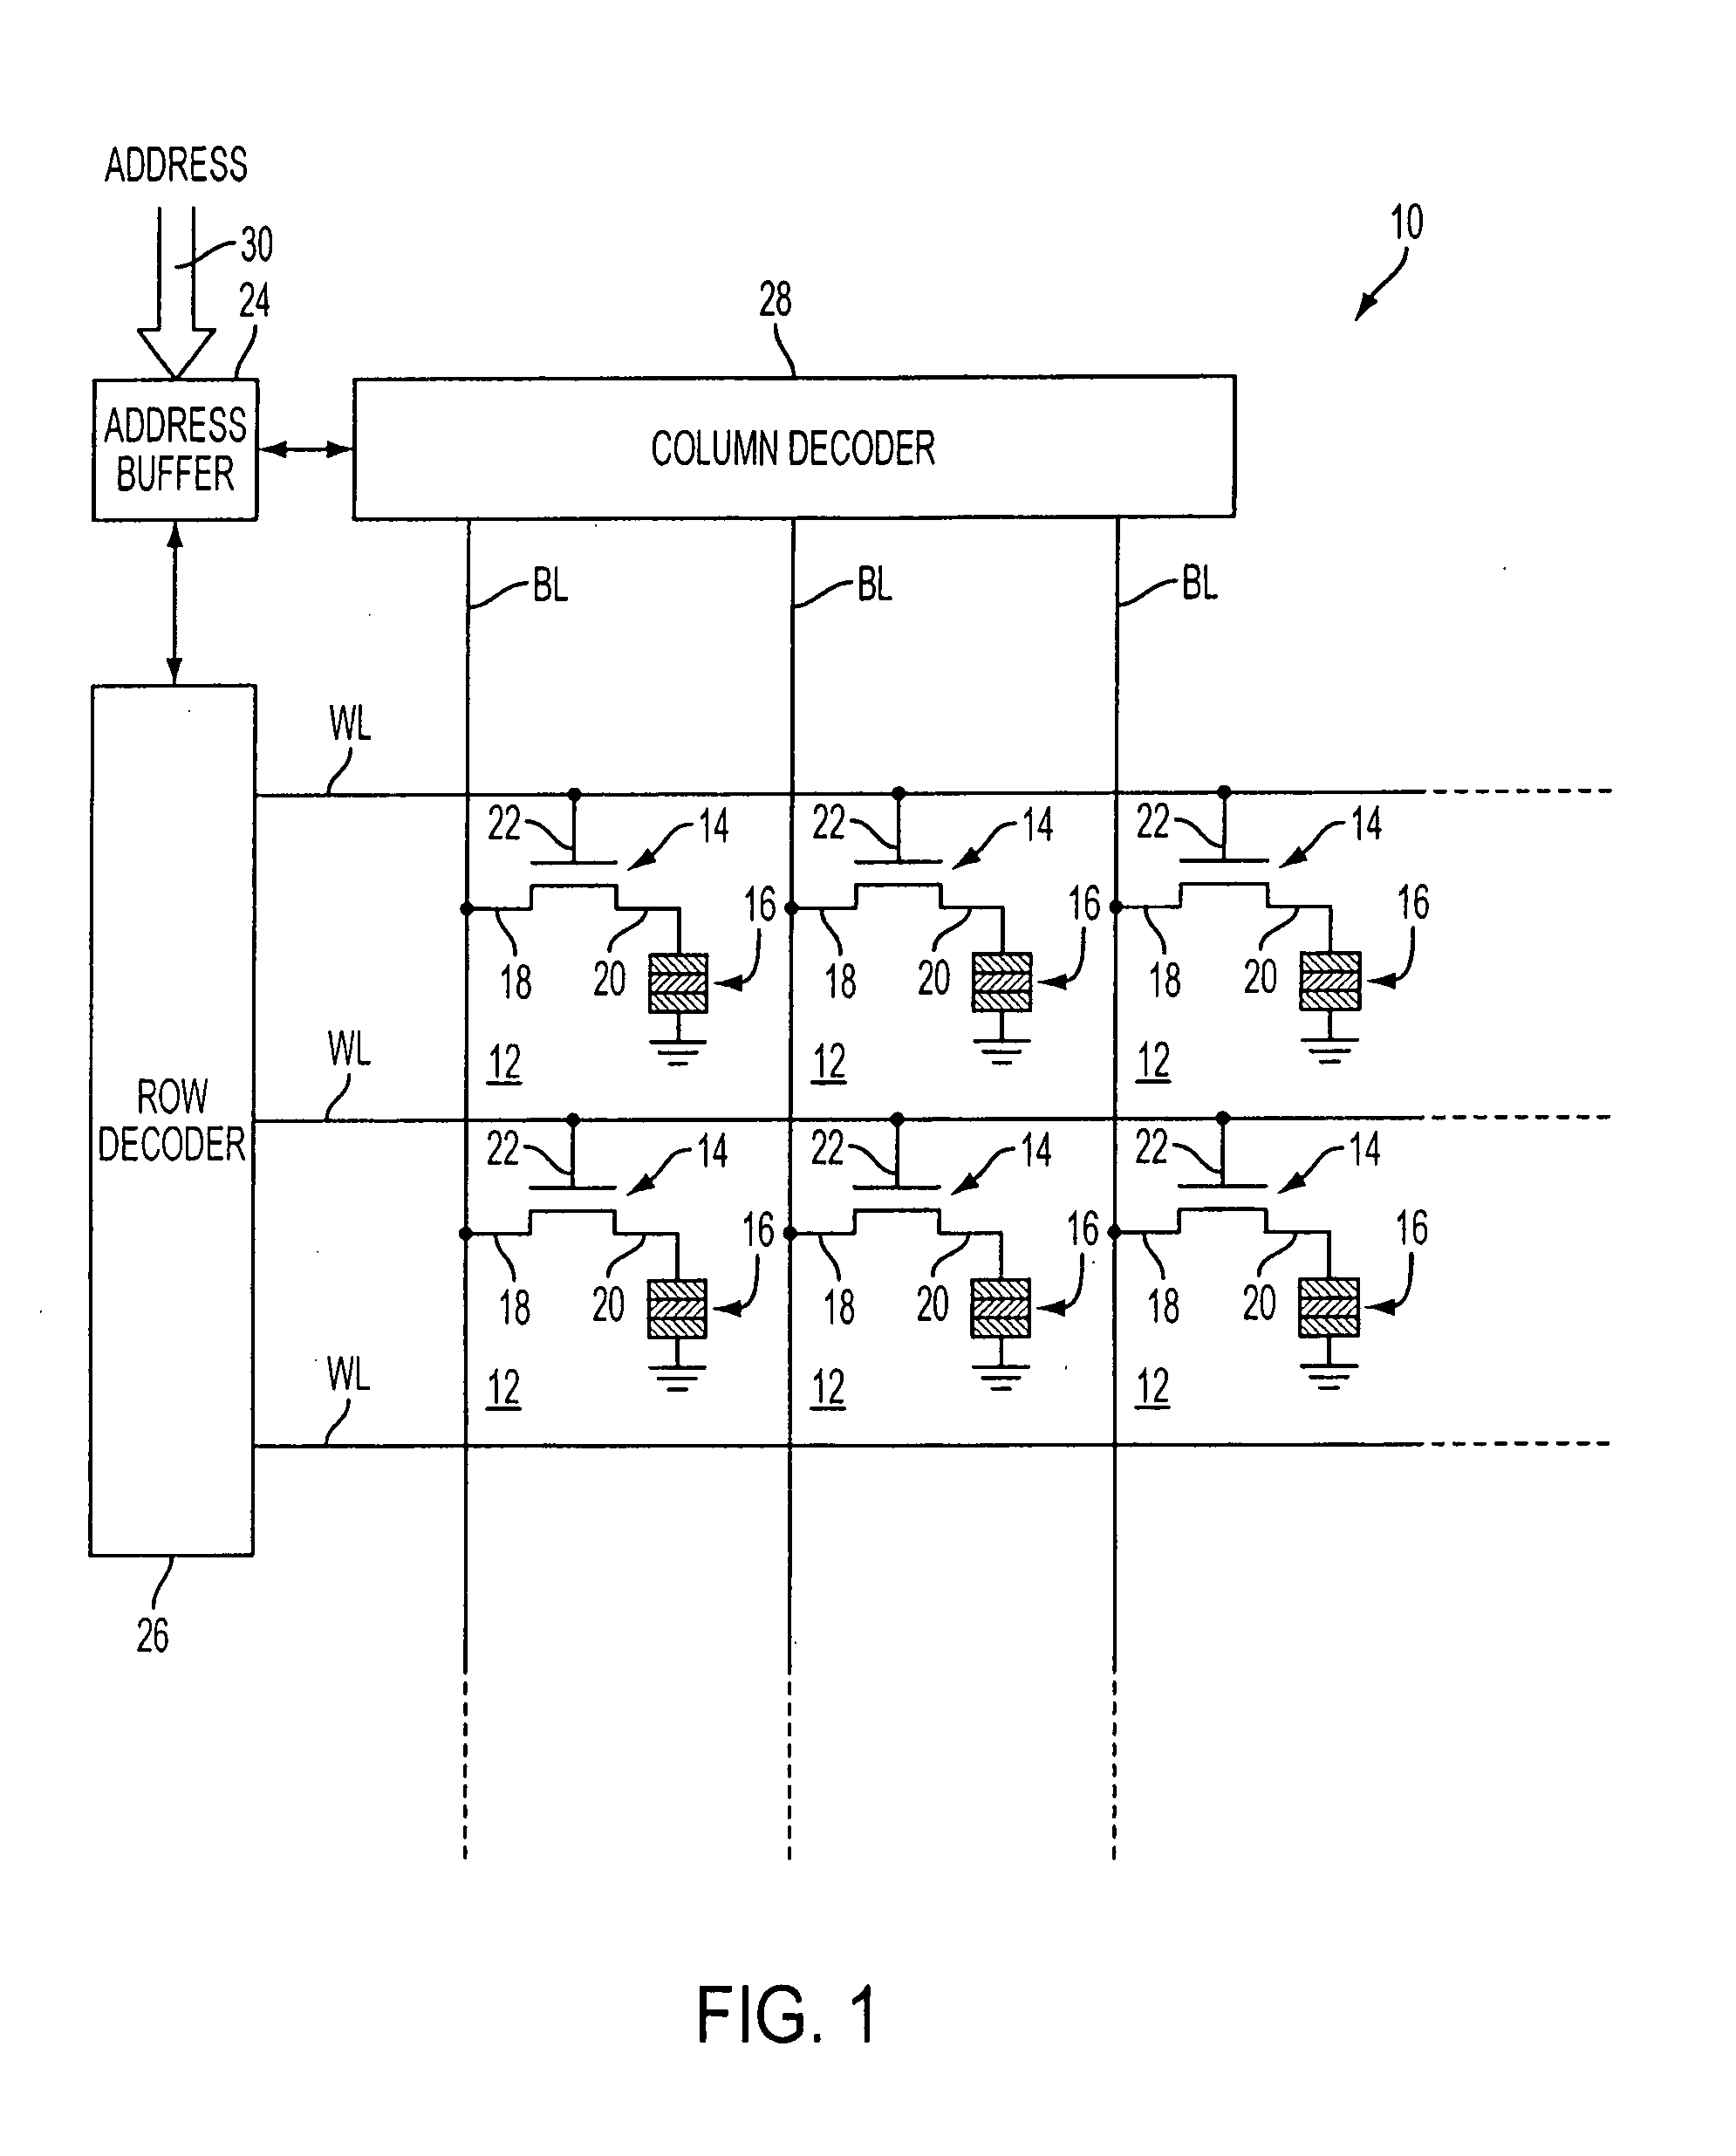 Random access memory device utilizing a vertically oriented select transistor